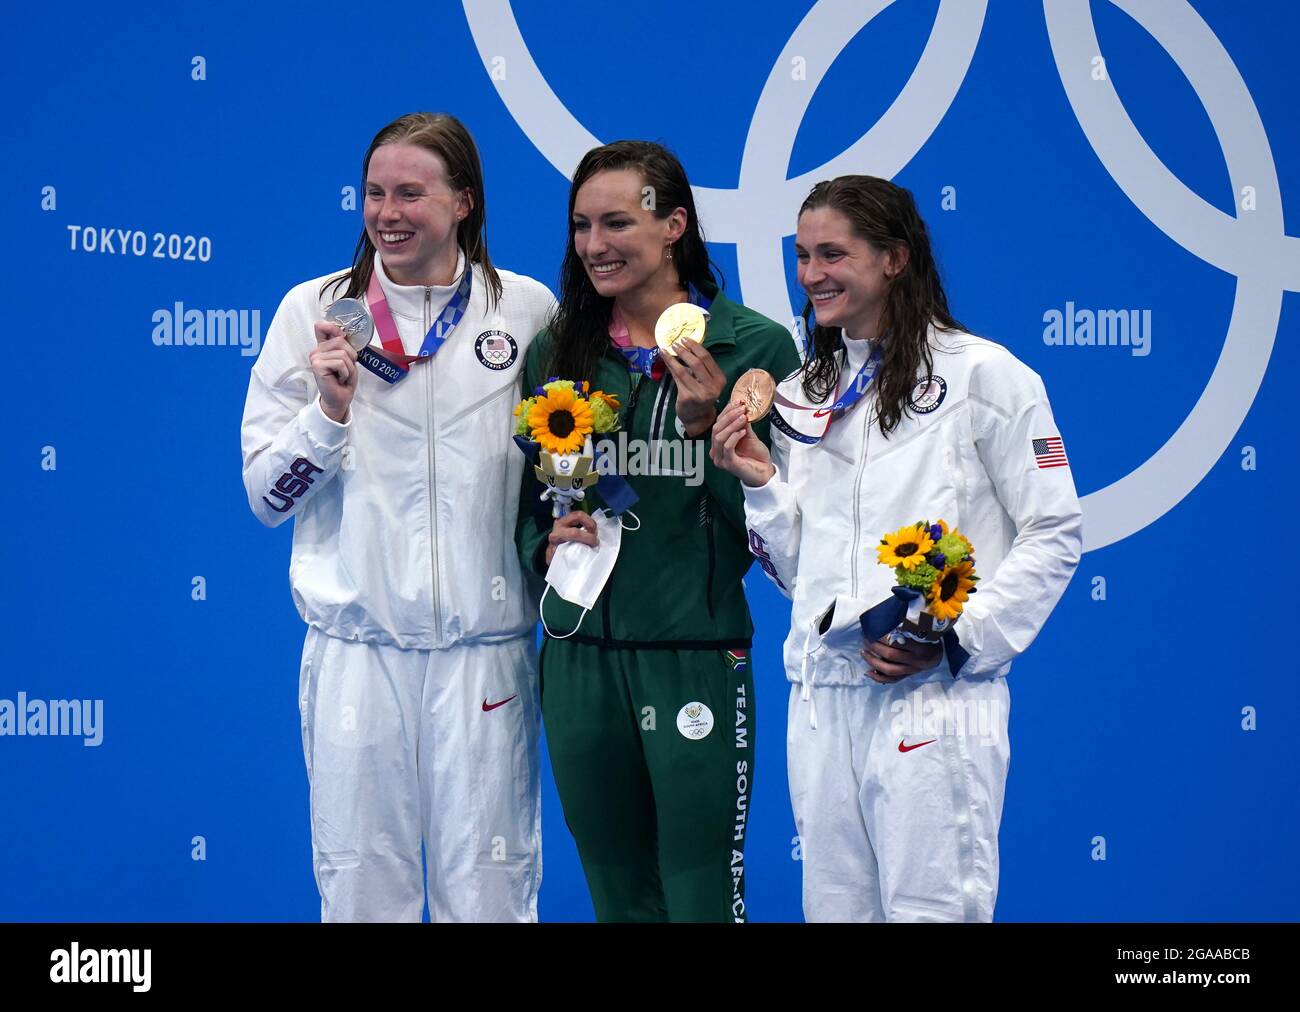 USA's Lilly King, silver, South Africa's Tatjana Schoenmaker, gold, and USA's Annie Lazor, bronze, on the podium after the Women's 200m Breaststroke Final at Tokyo Aquatics Centre on the seventh day of the Tokyo 2020 Olympic Games in Japan. Picture date: Friday July 30, 2021. Stock Photo